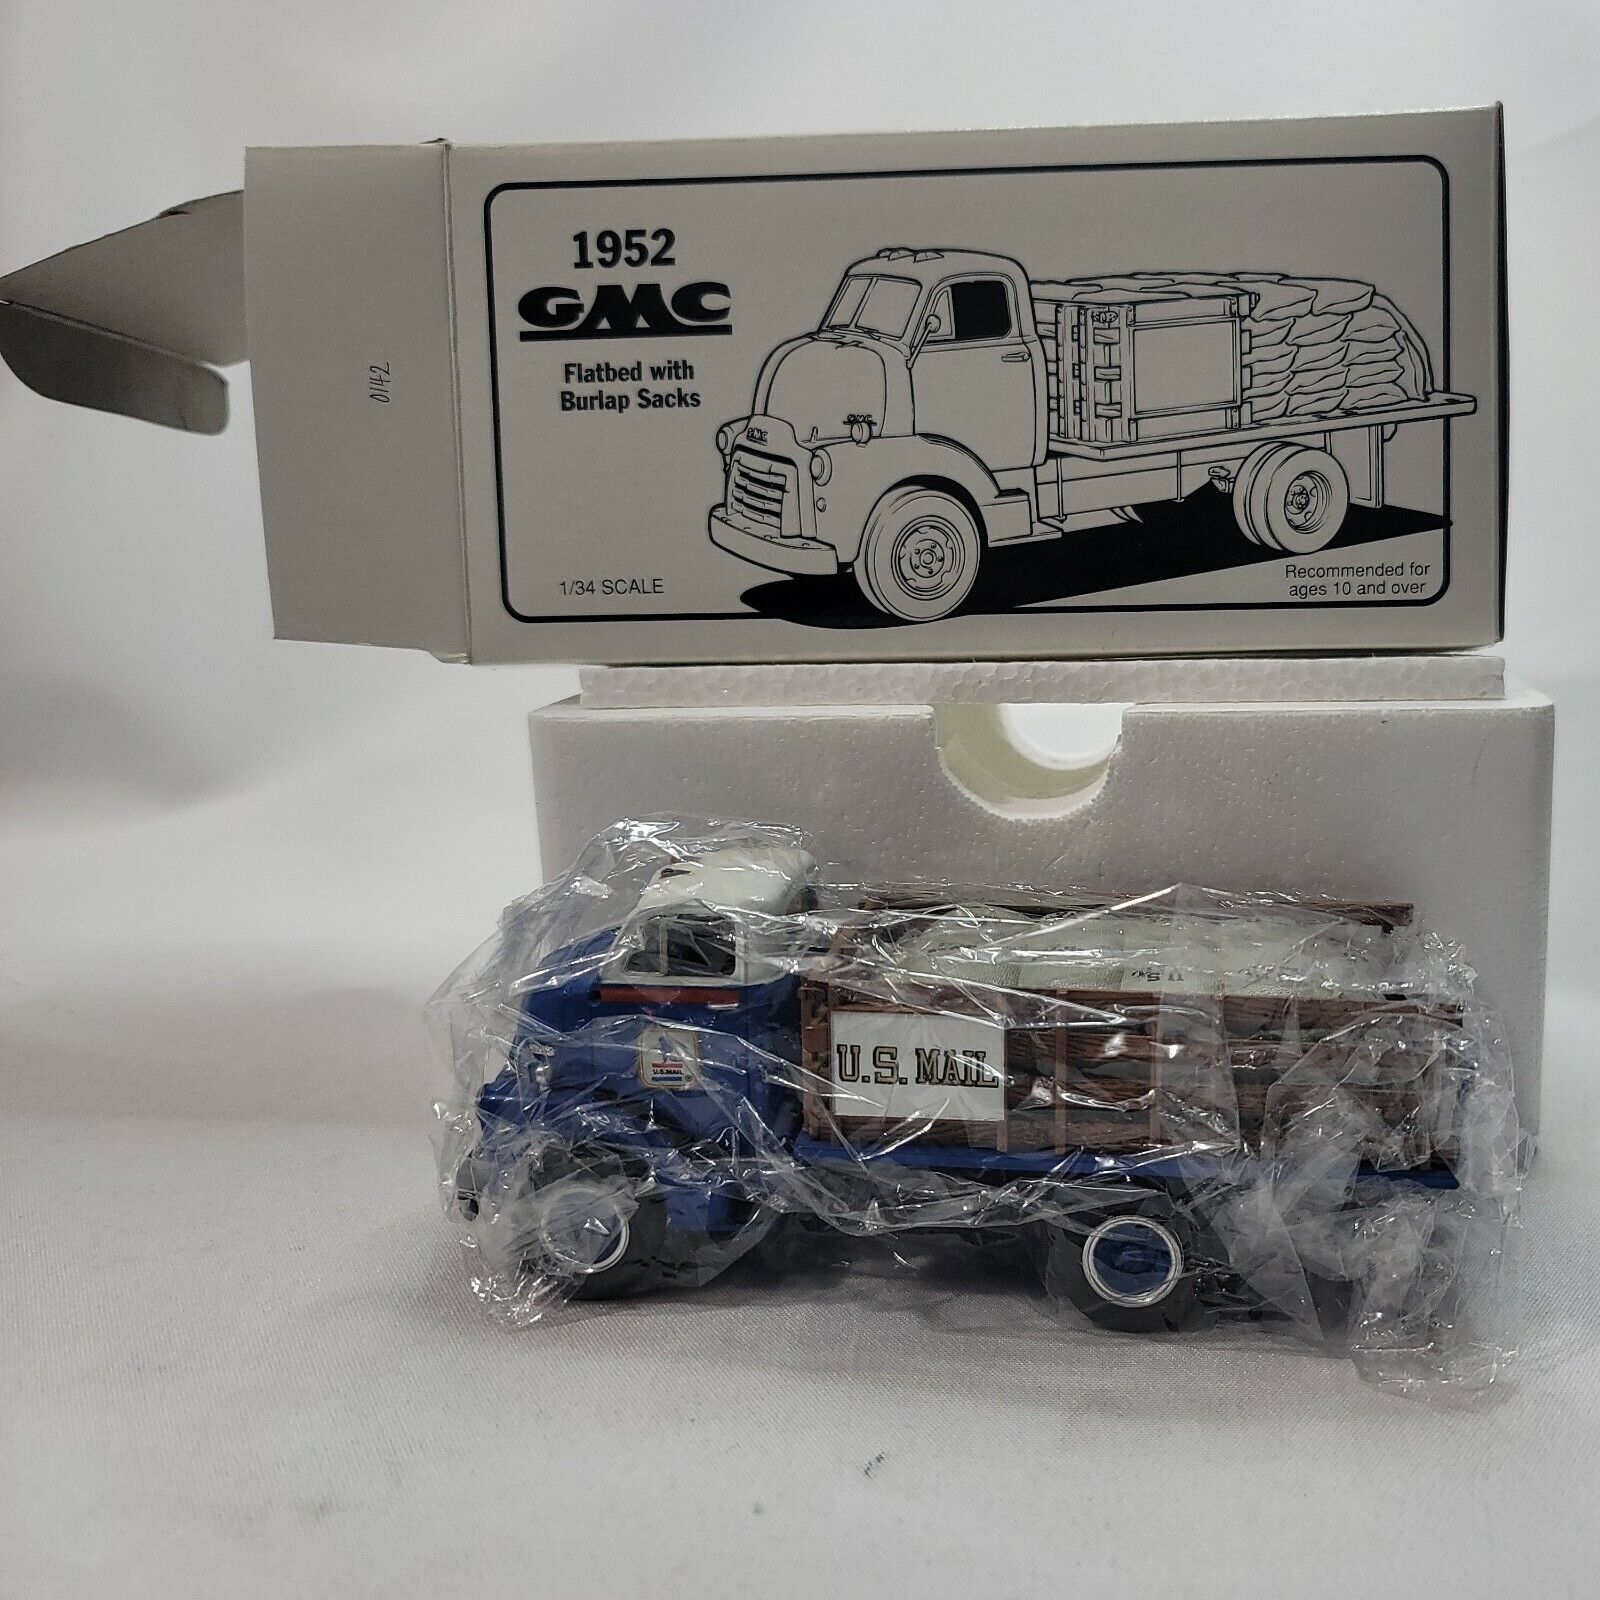 First Gear Inc US Mail USPS 1952 GMC Flatbed Stakebed Delivery Truck /Scale 1:34